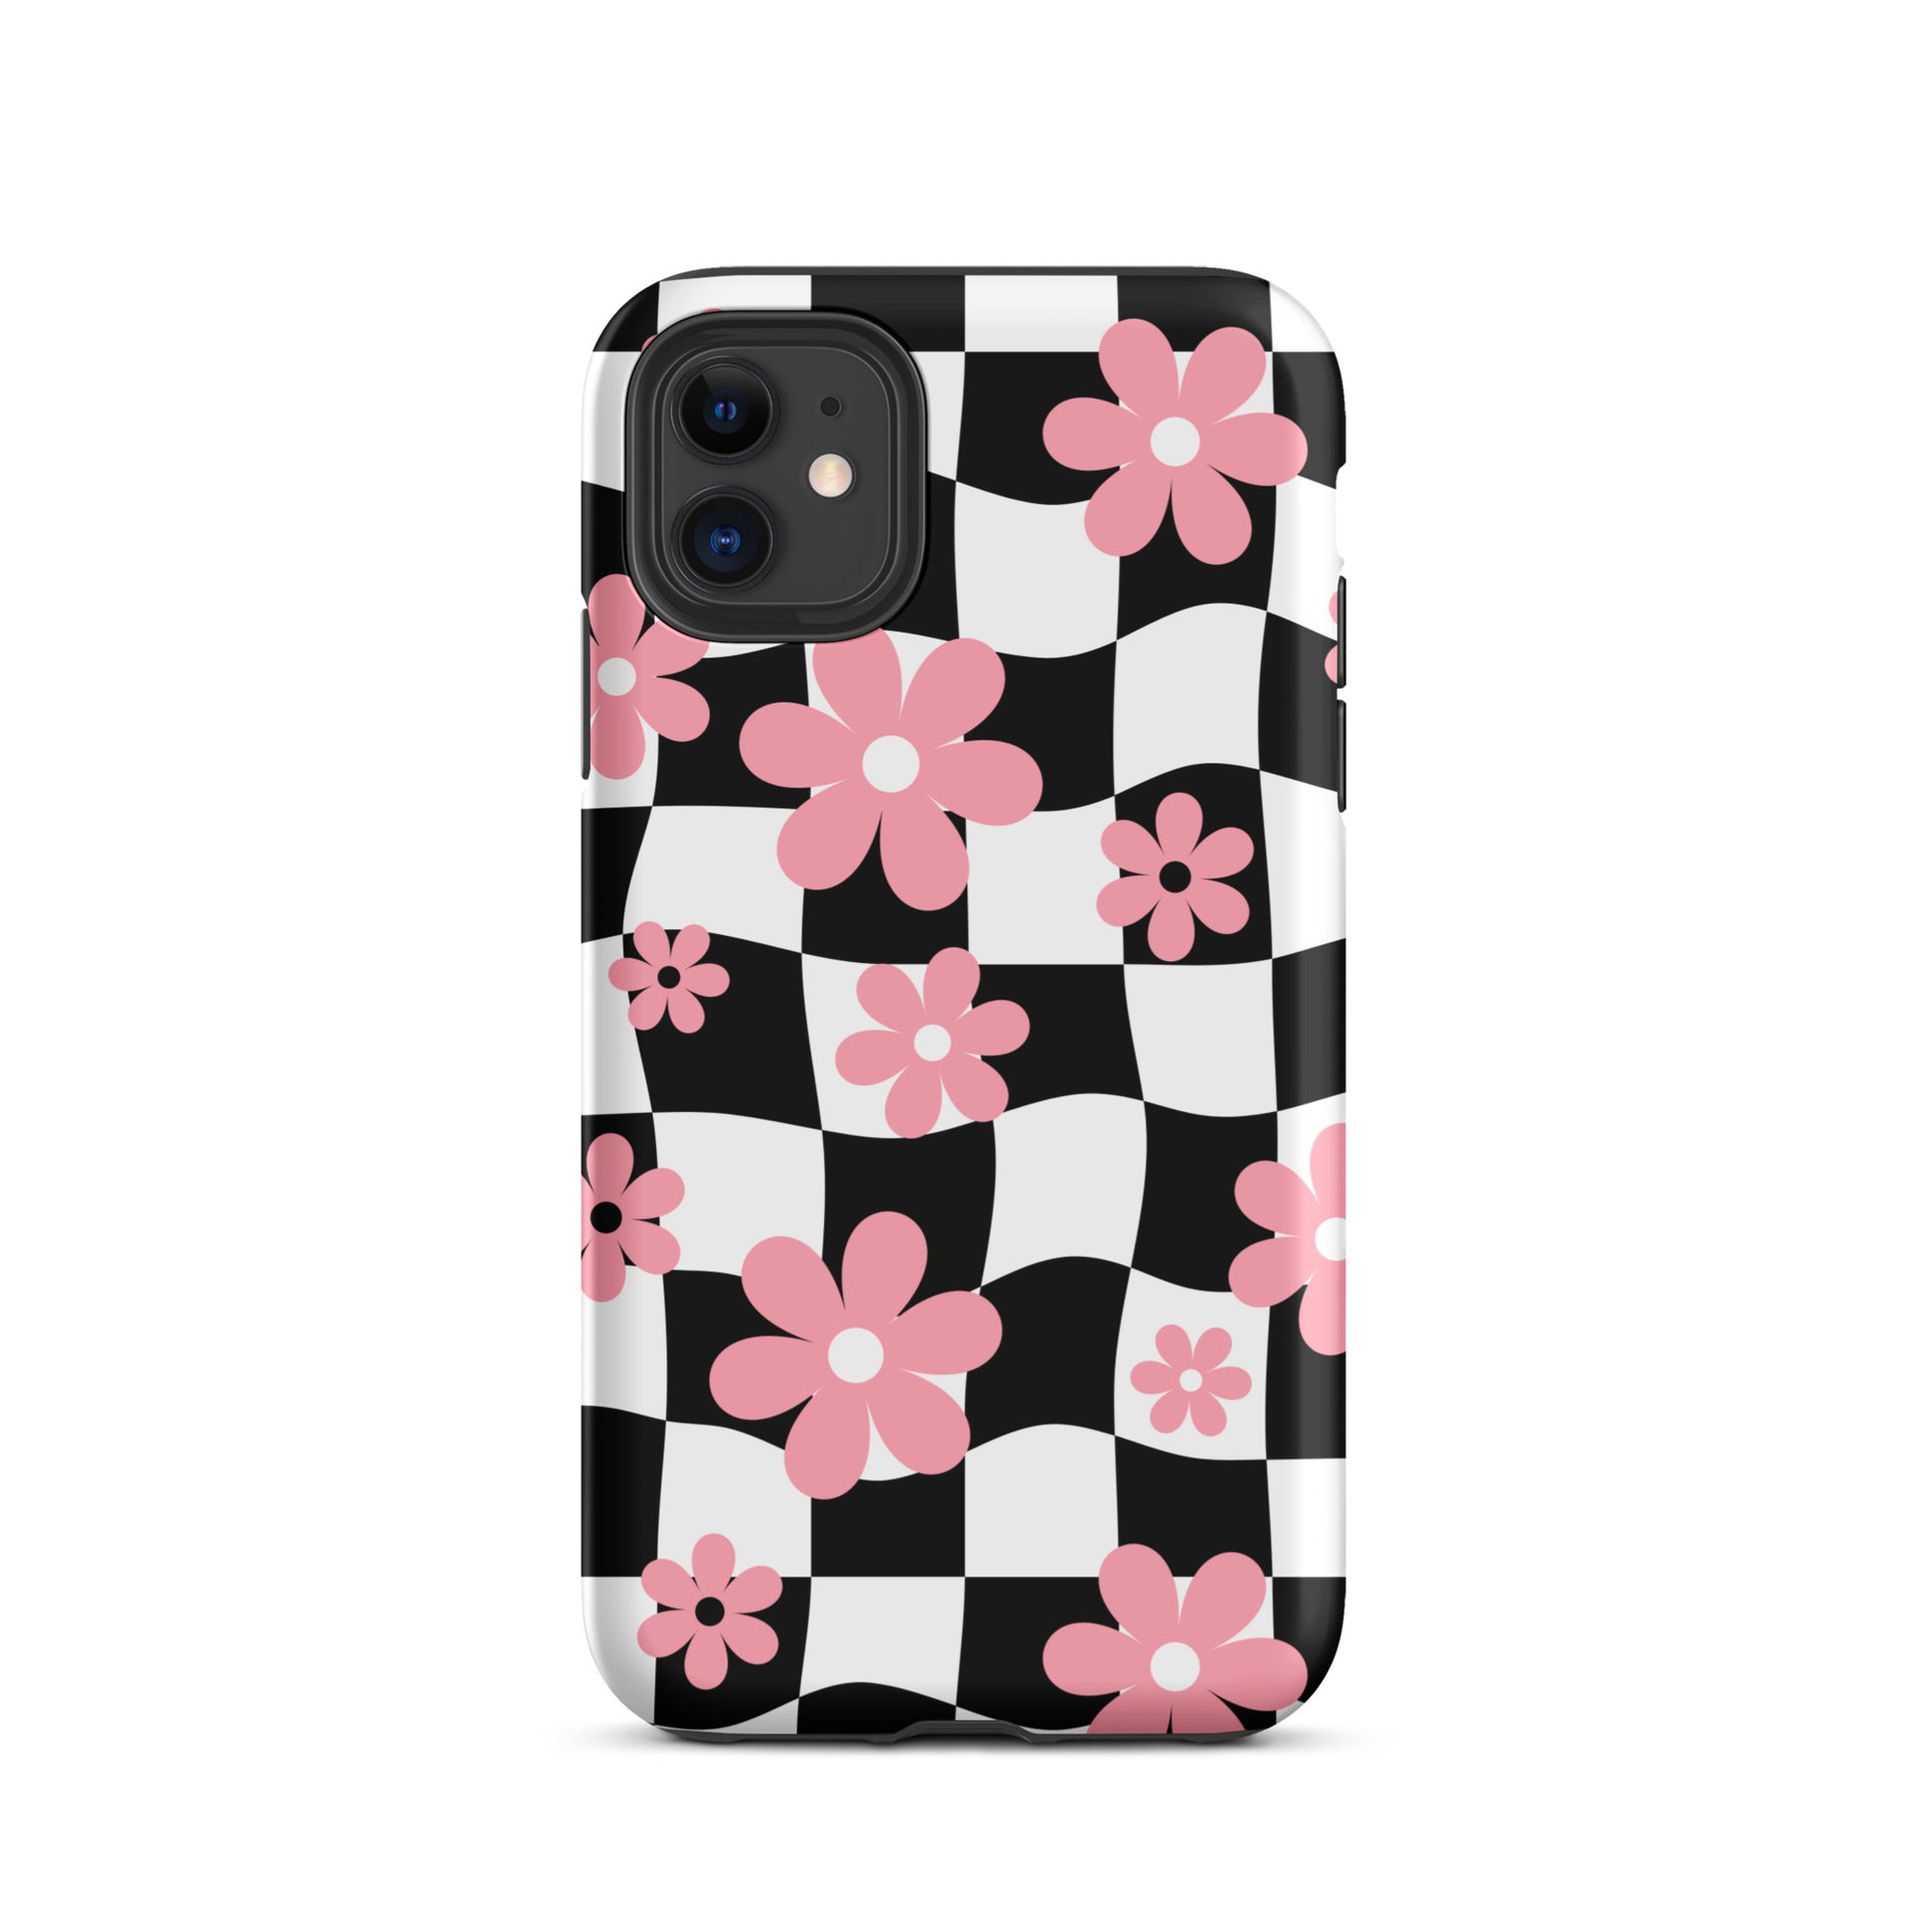 Floral Wavy Checkered iPhone Case iPhone 11 Matte